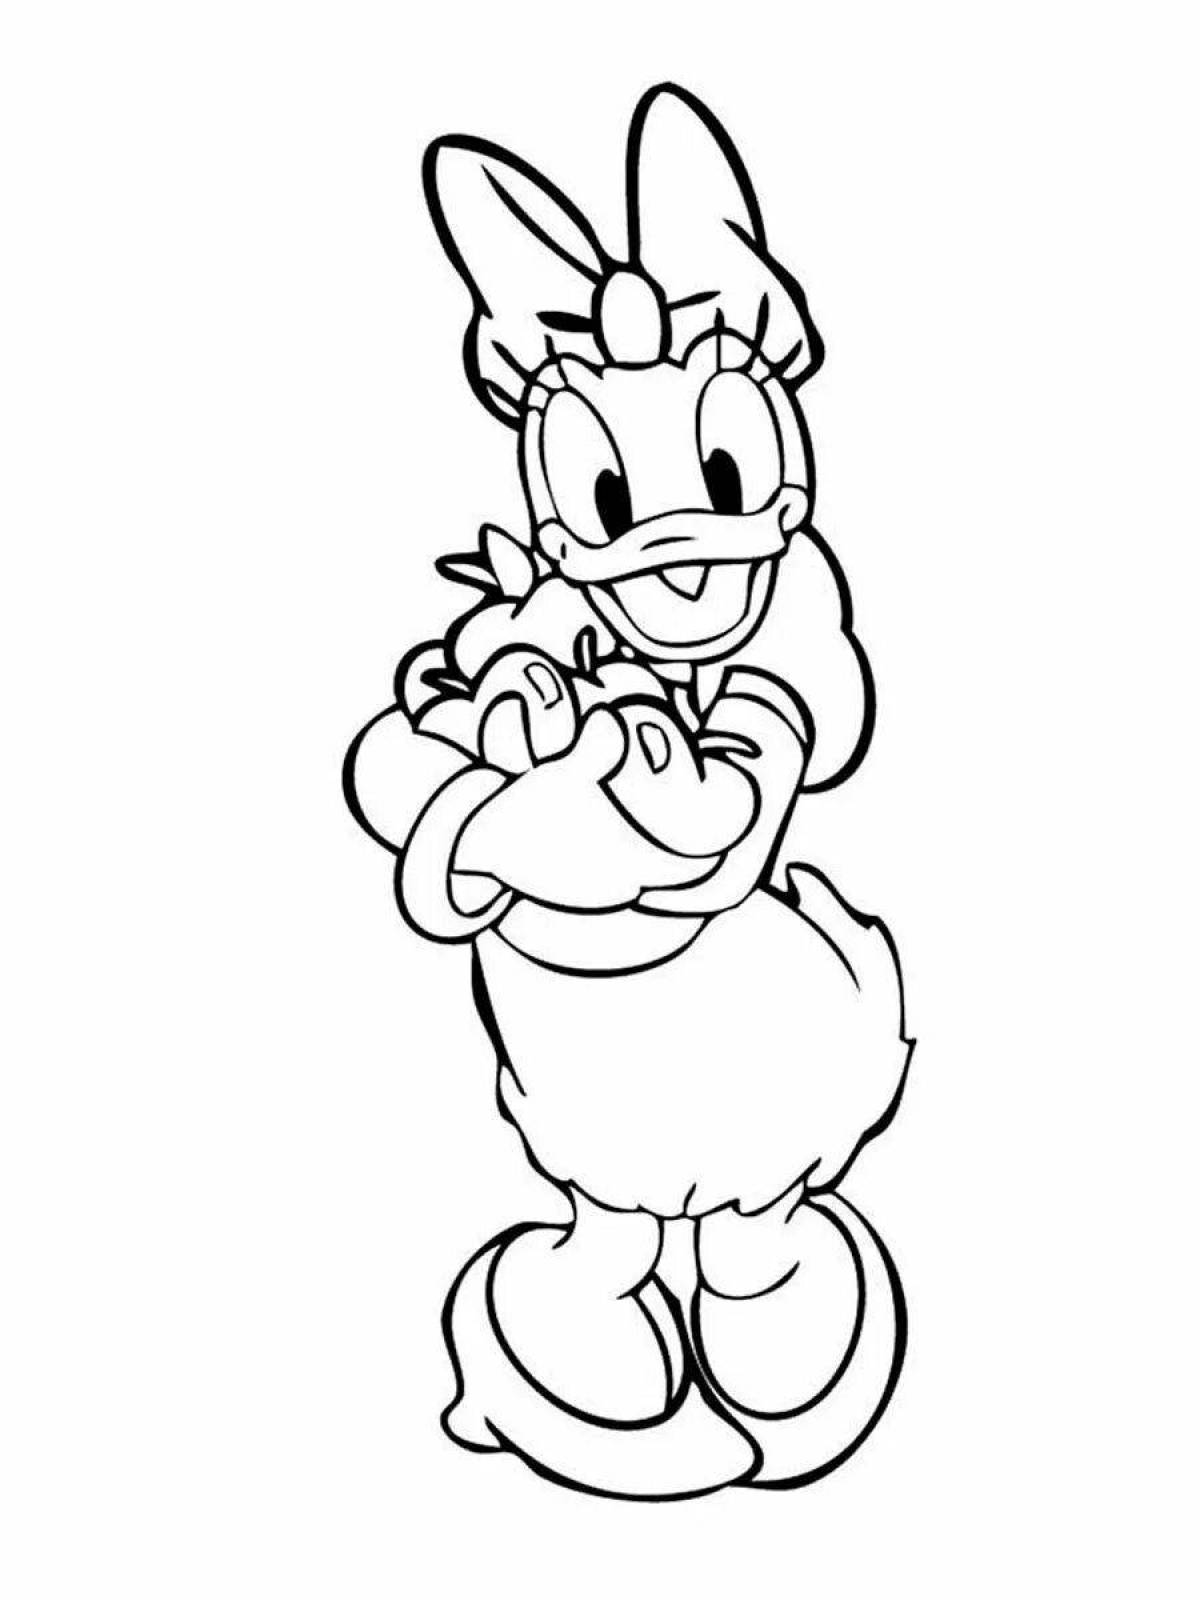 Playful daisy coloring page